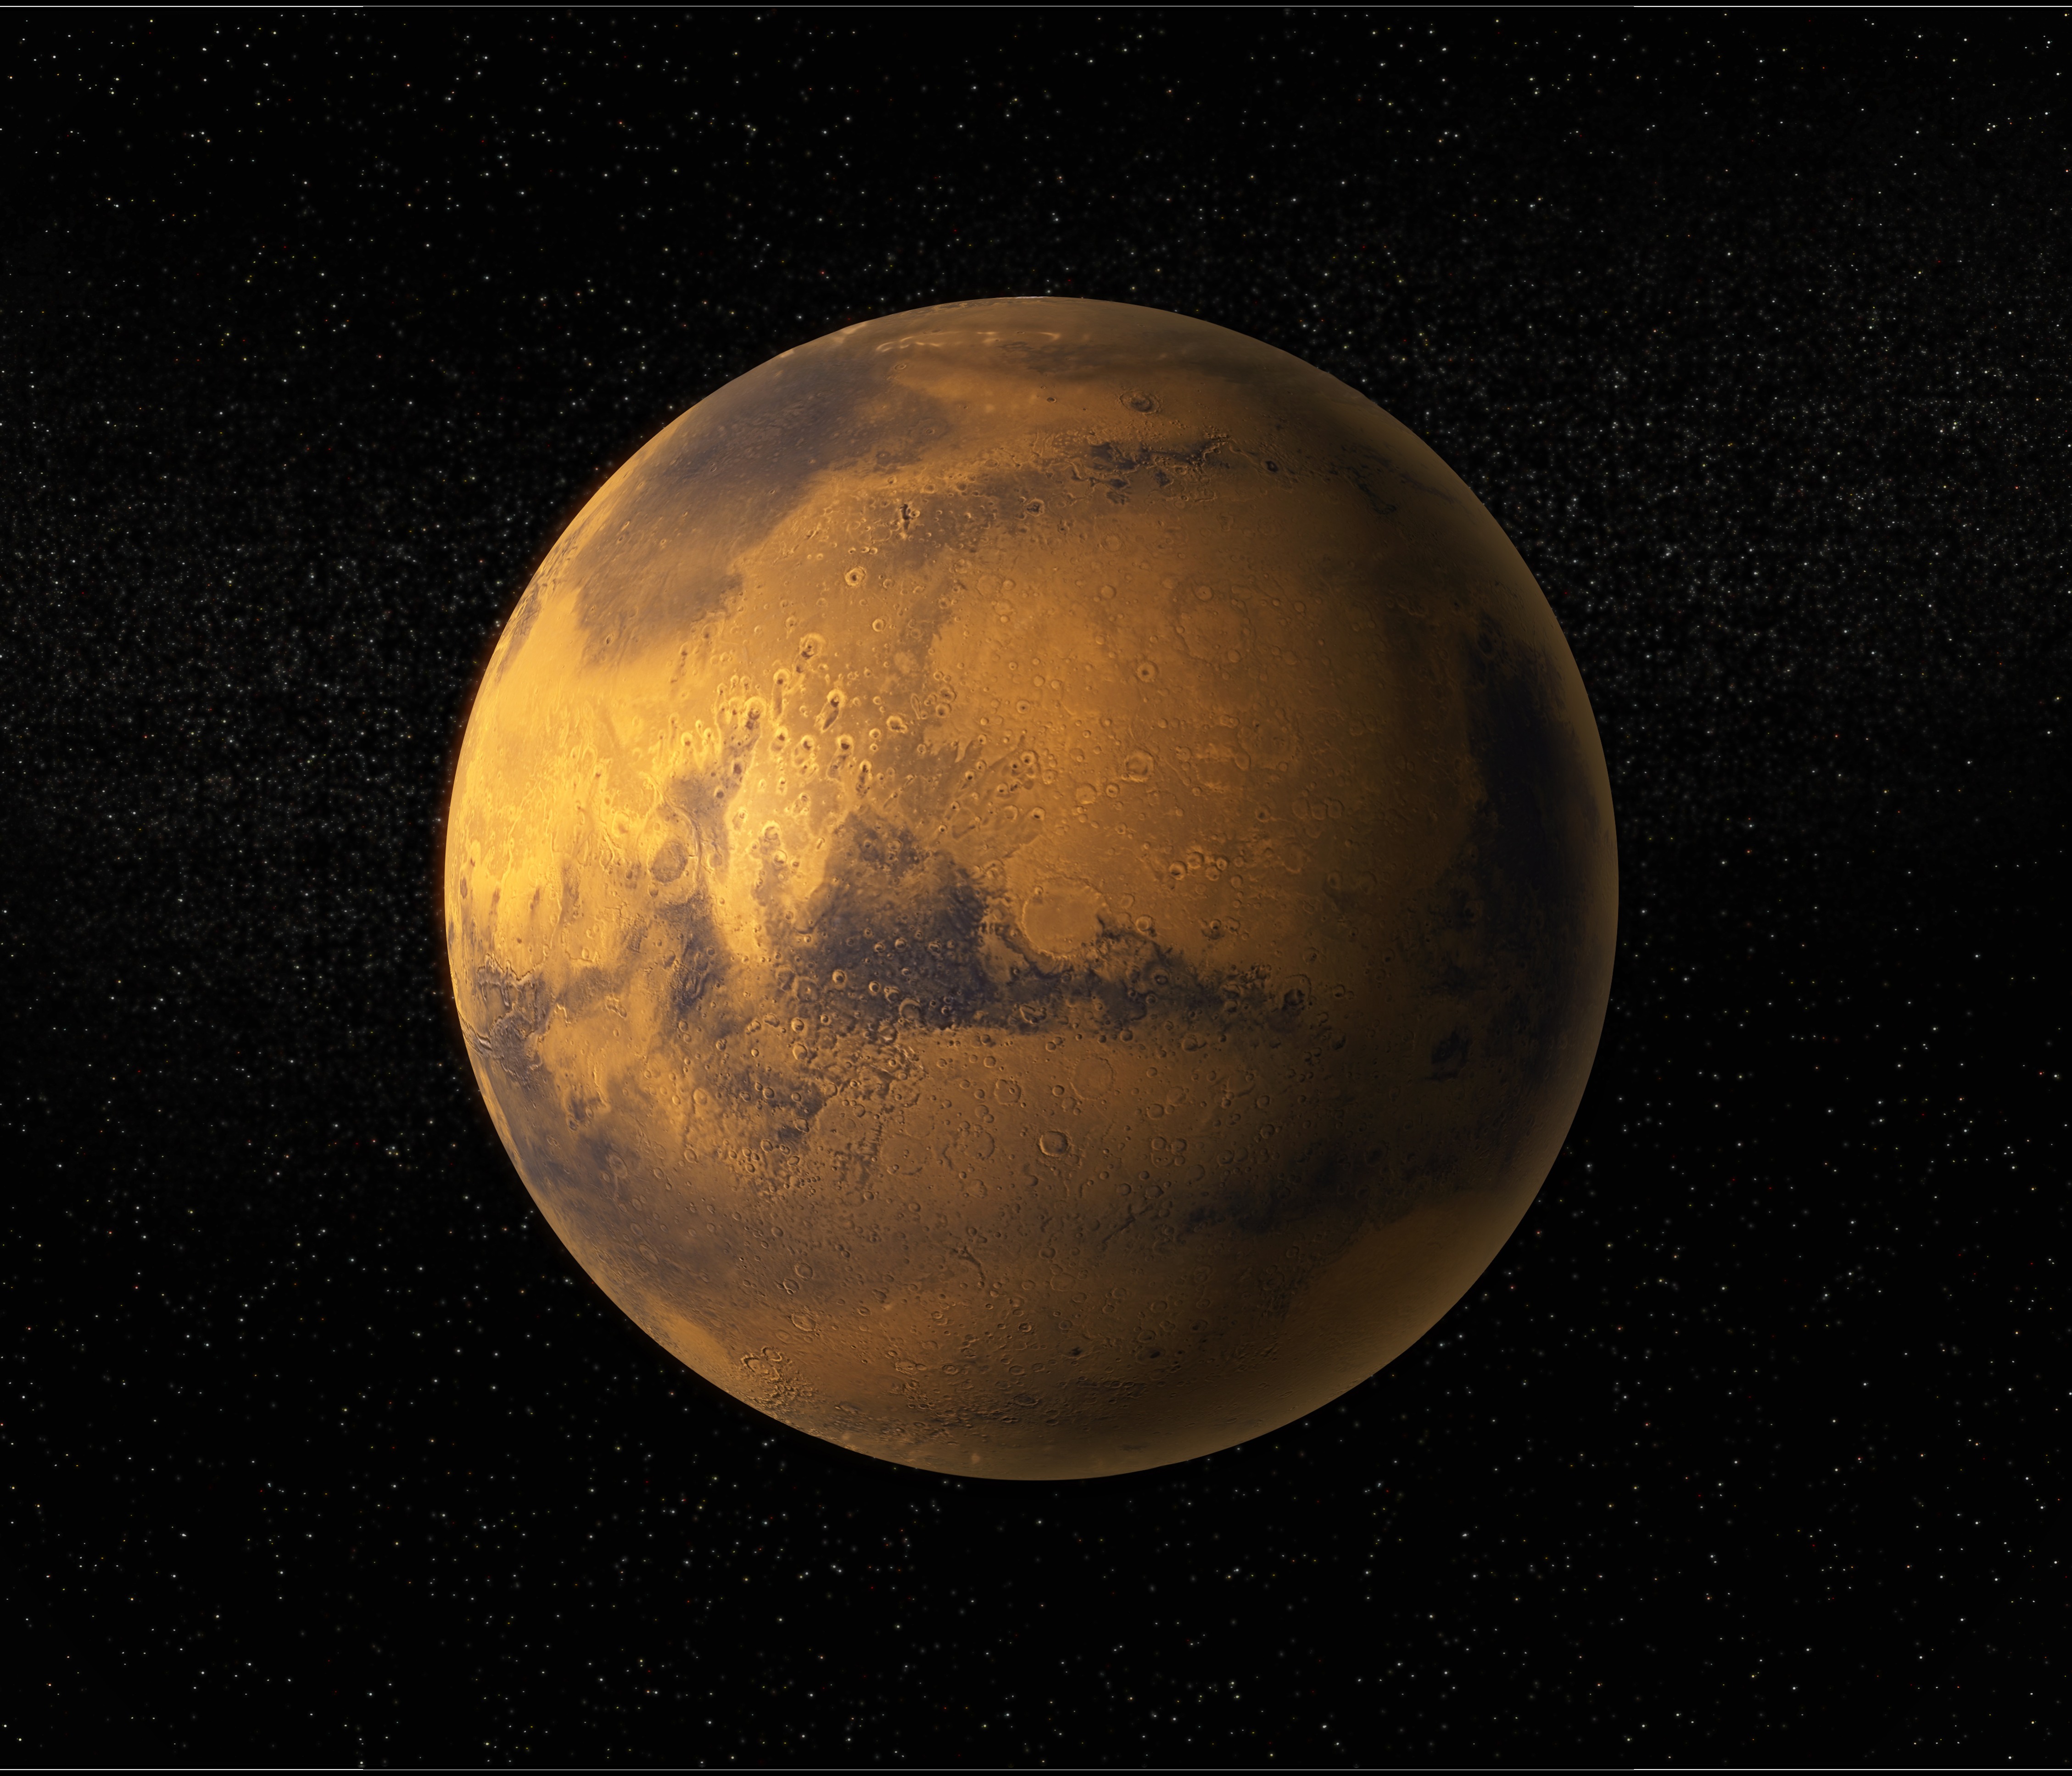 Mars—unless you want to name it something else